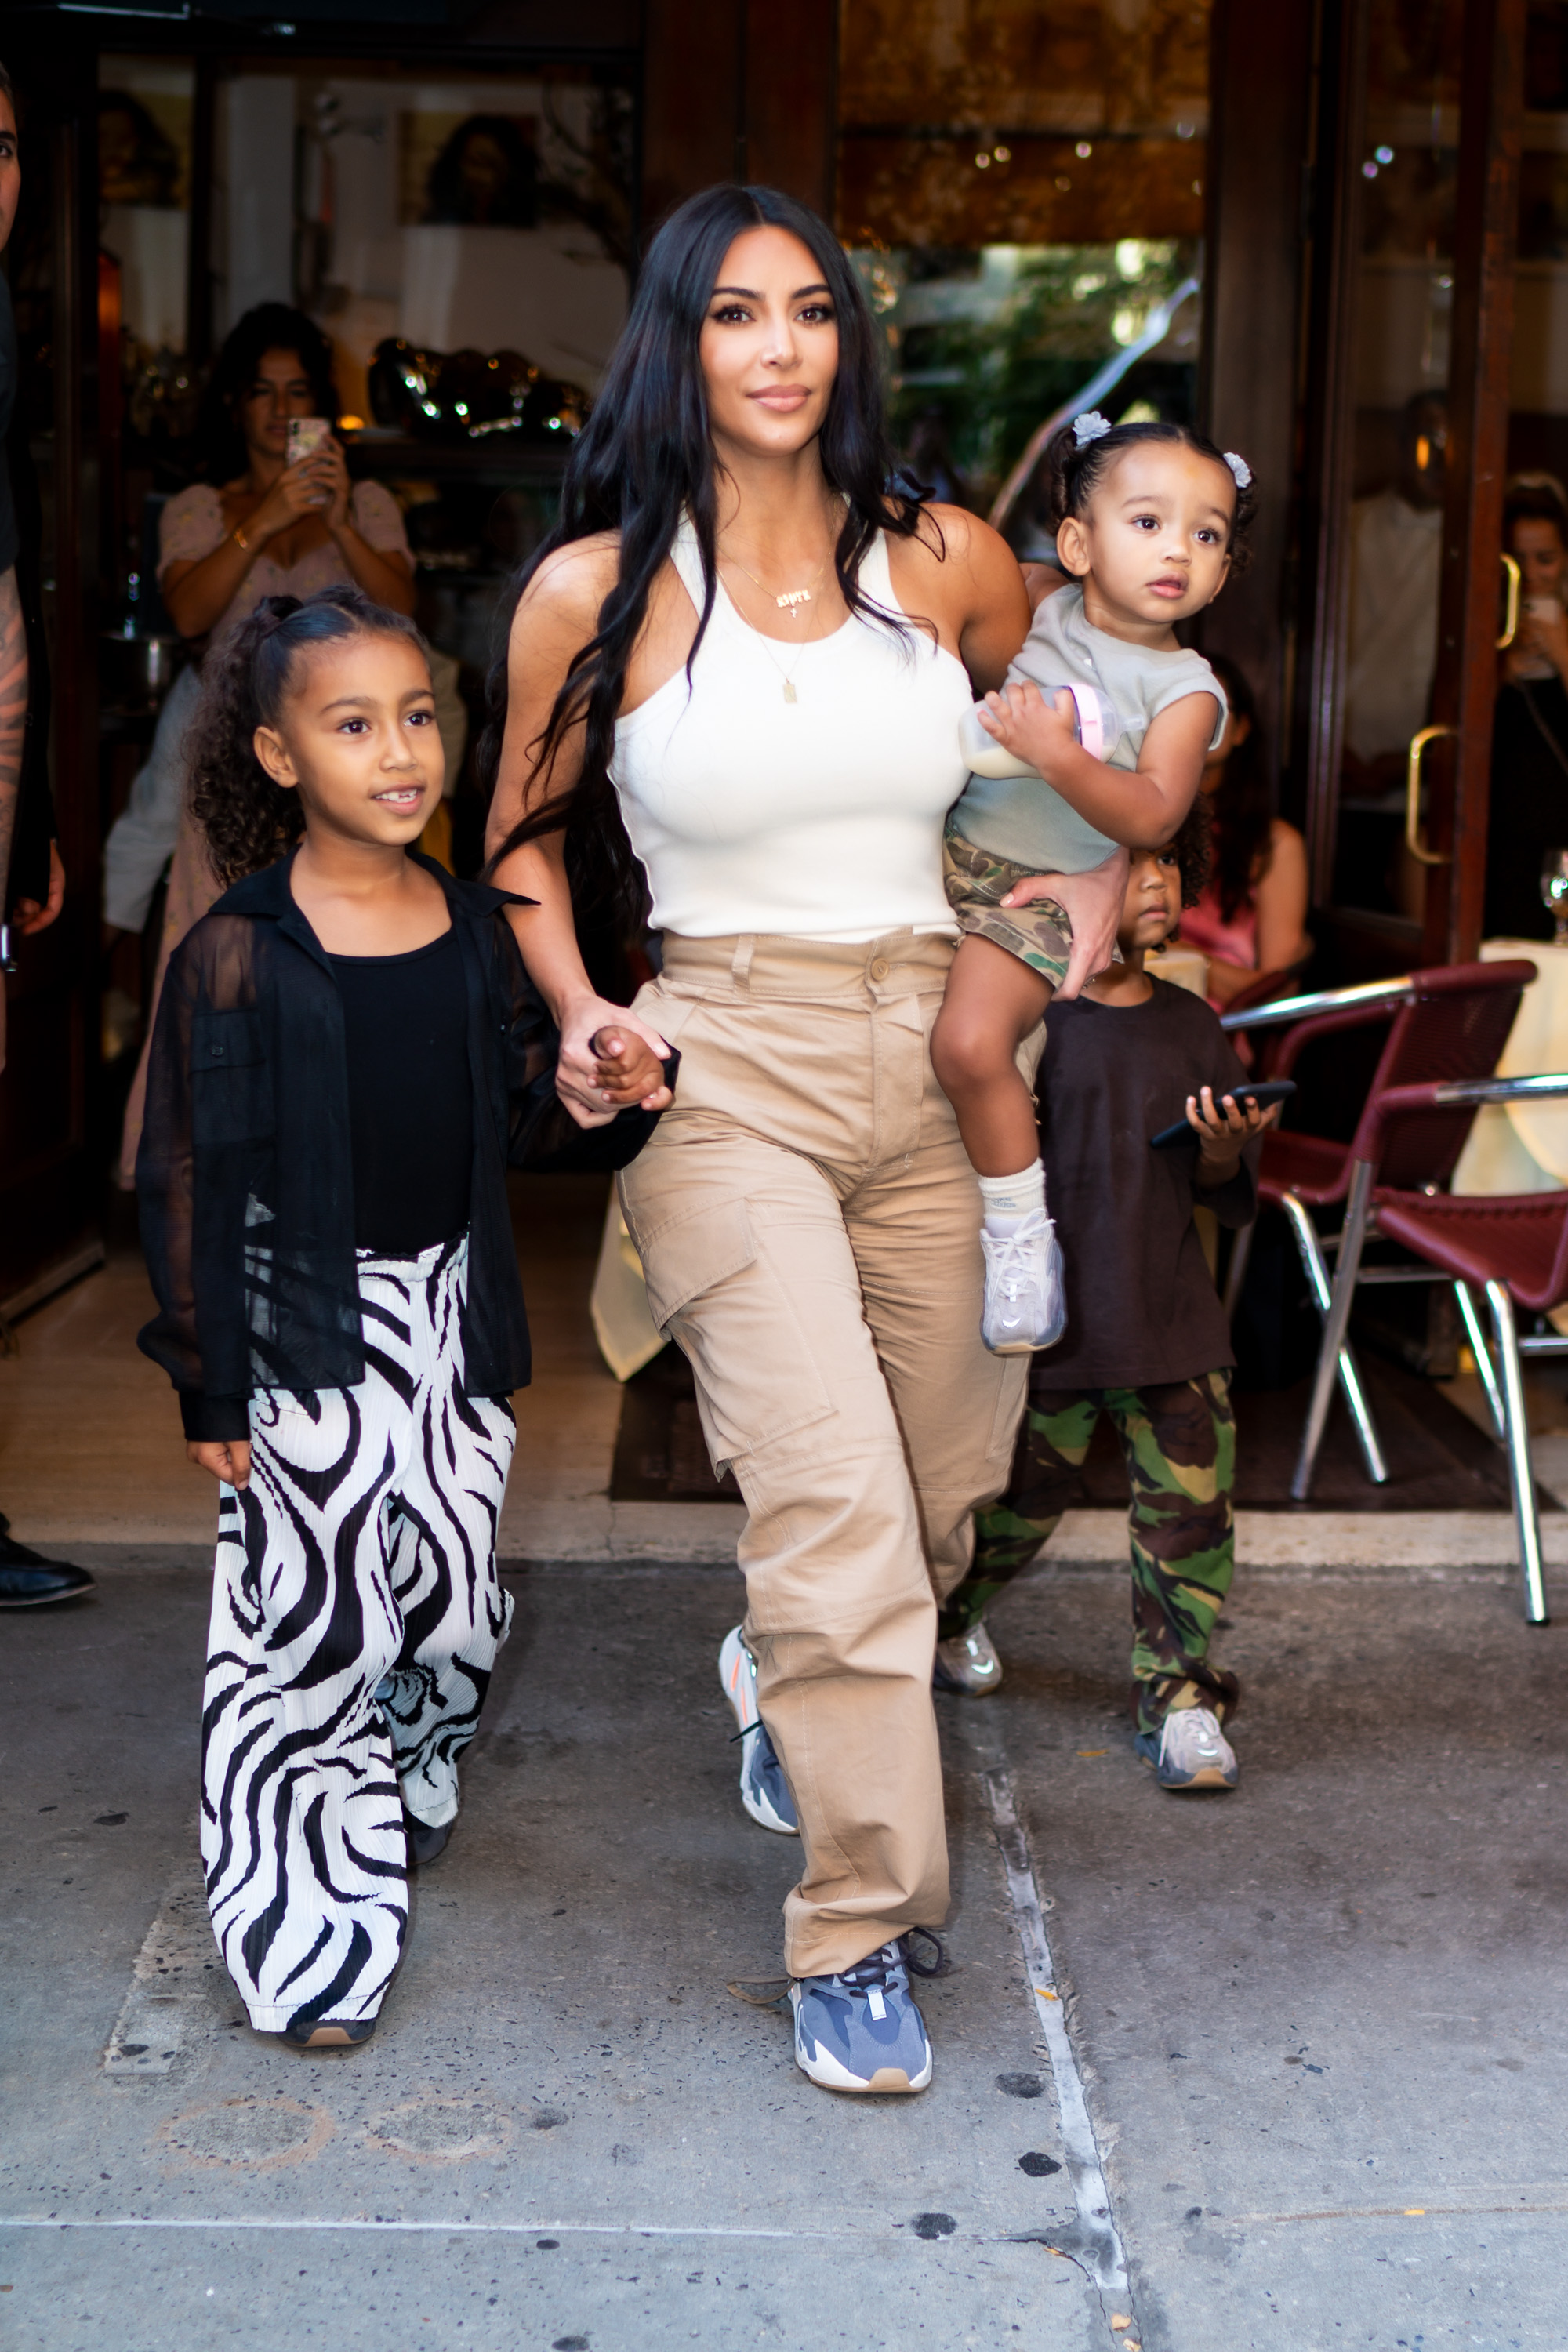 Kim Kardashian with her children North, Saint and Chicago in SoHo on September 29, 2019 in New York City. | Source: Getty Images